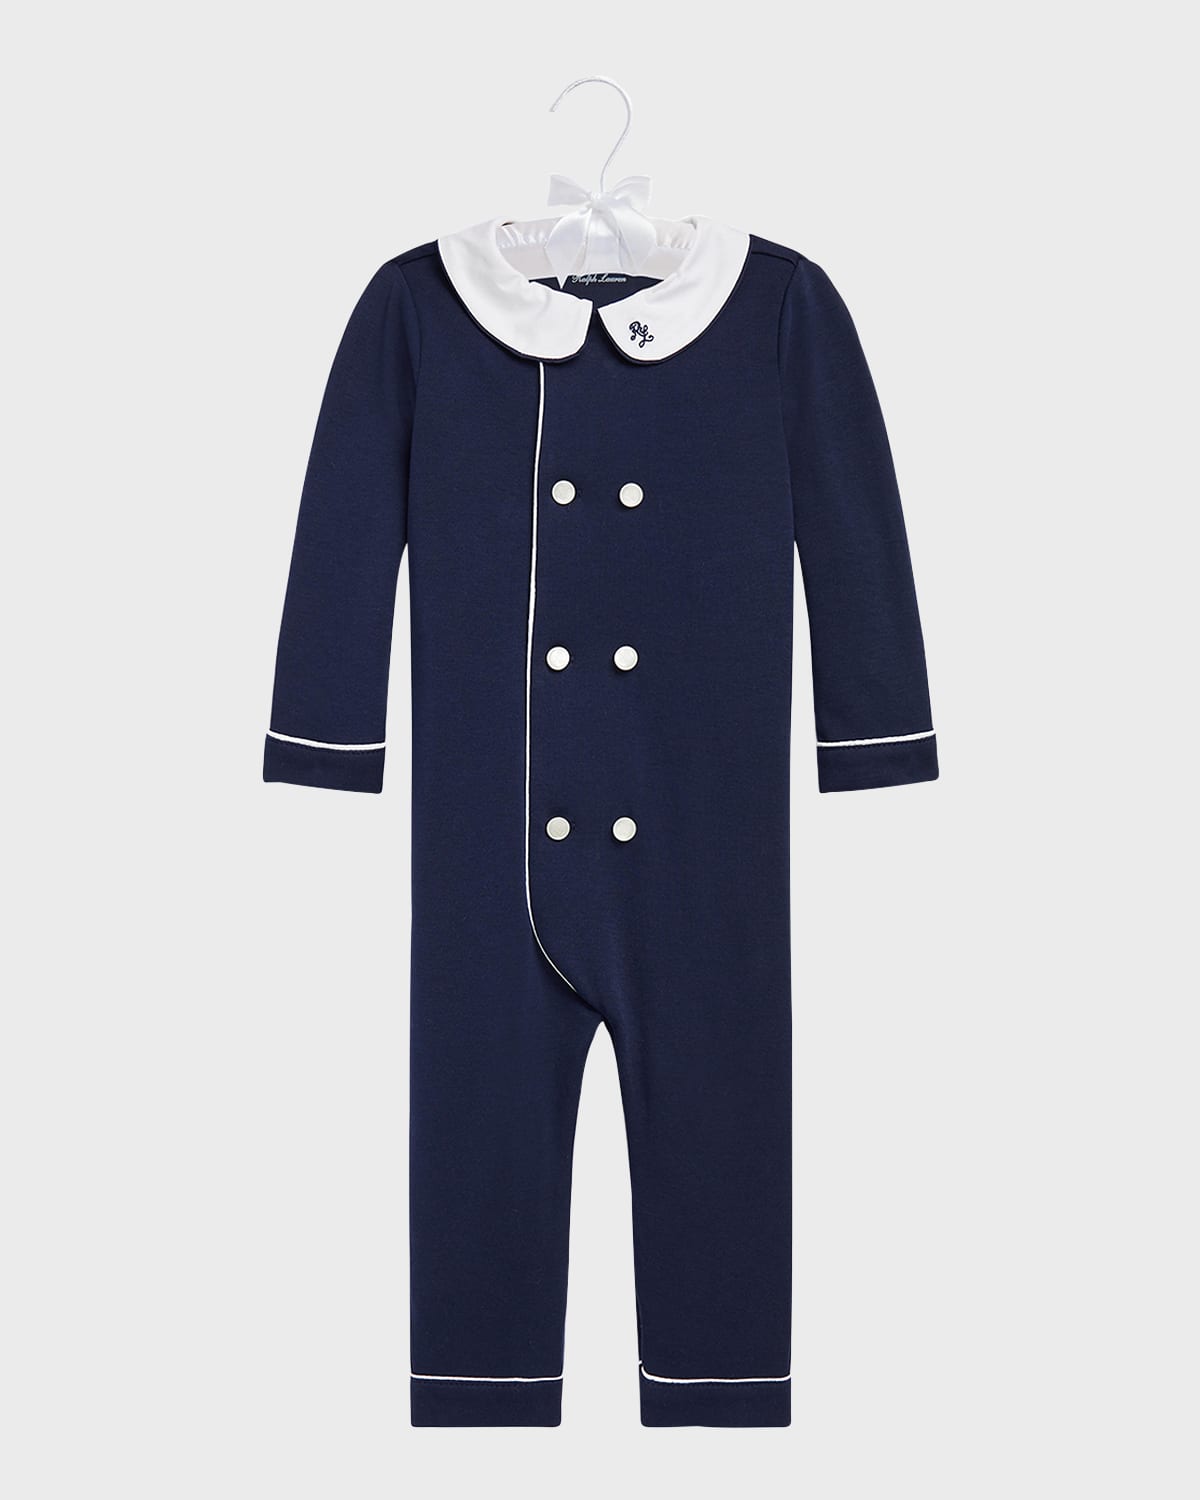 Boy's Double Breasted Embroidered Coverall, Size 3M-24M